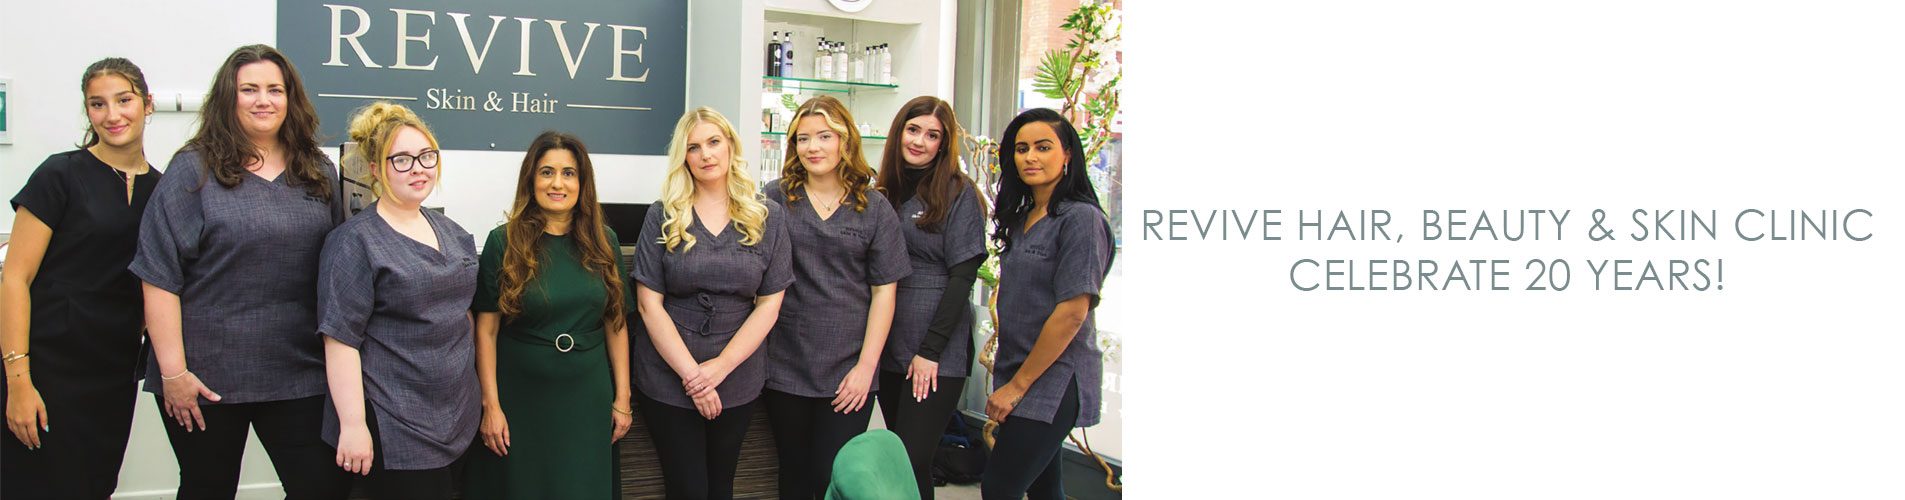 Revive Hair Beauty Skin Clinic Celebrate 20 Years in Altrinch